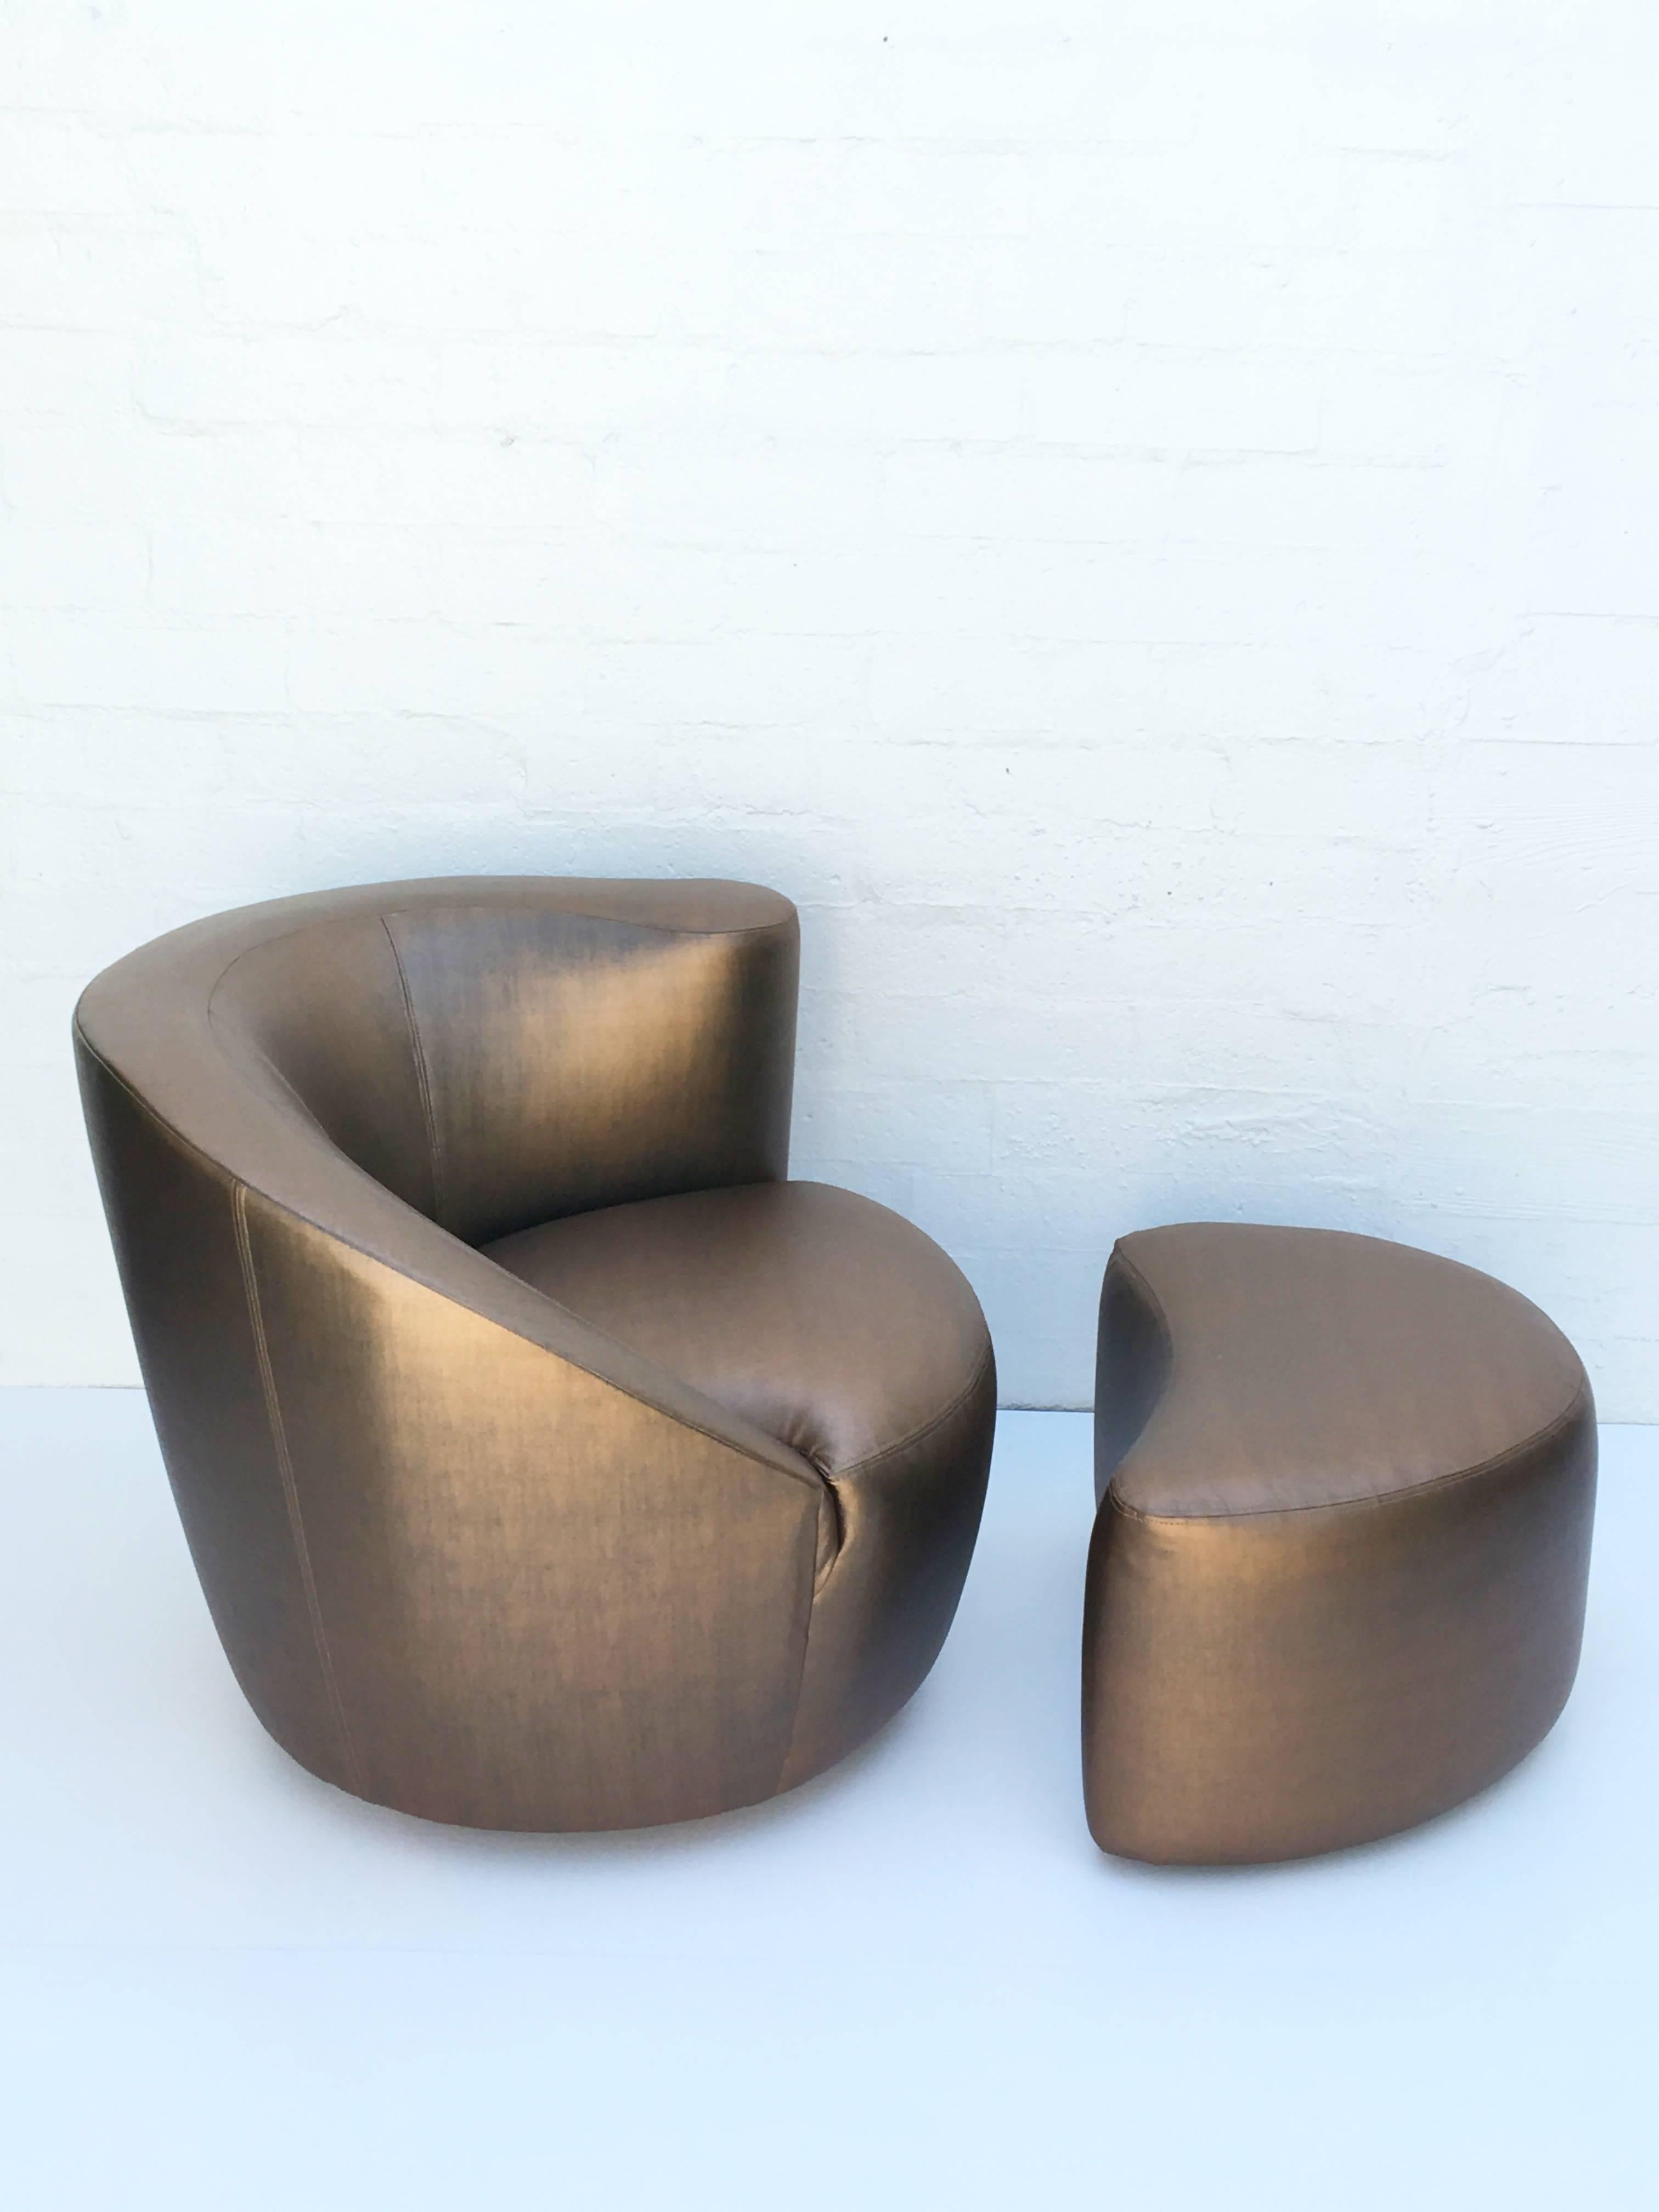 Pair of Swivel Lounge Chairs and Ottomans by Vladimir Kagan 1927-2016 1